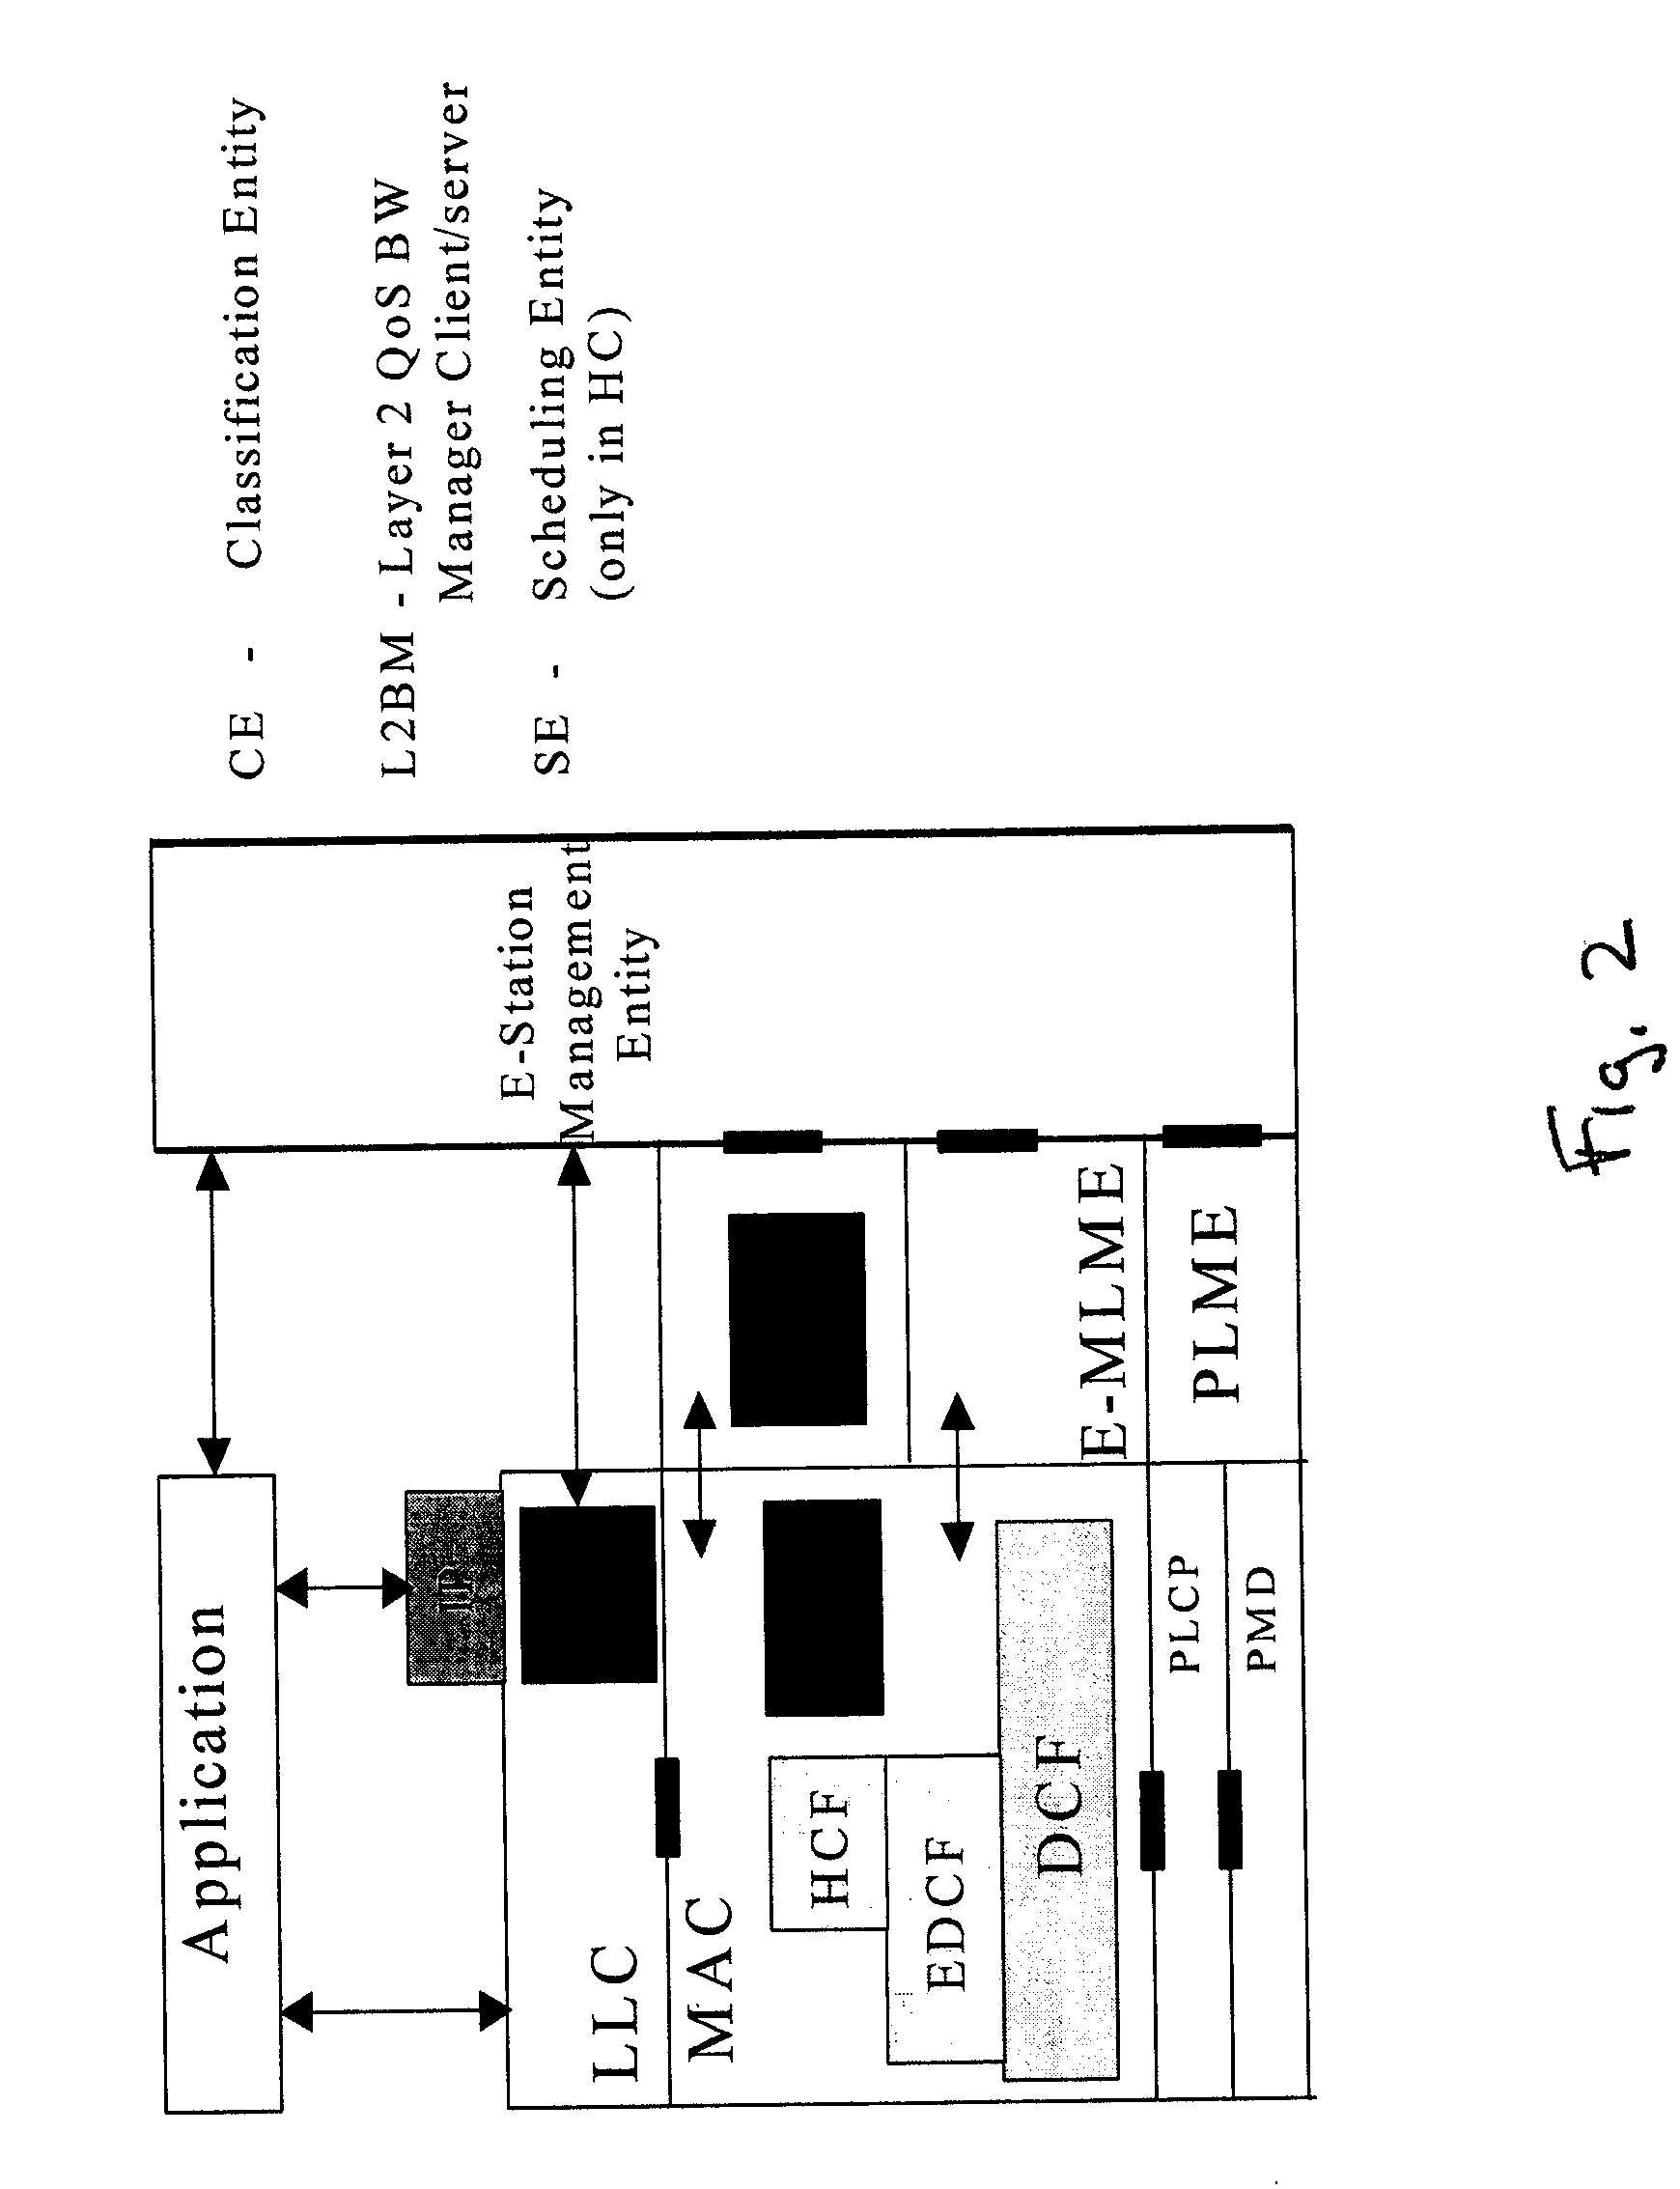 System and method for IEEE 802.11 network admission control